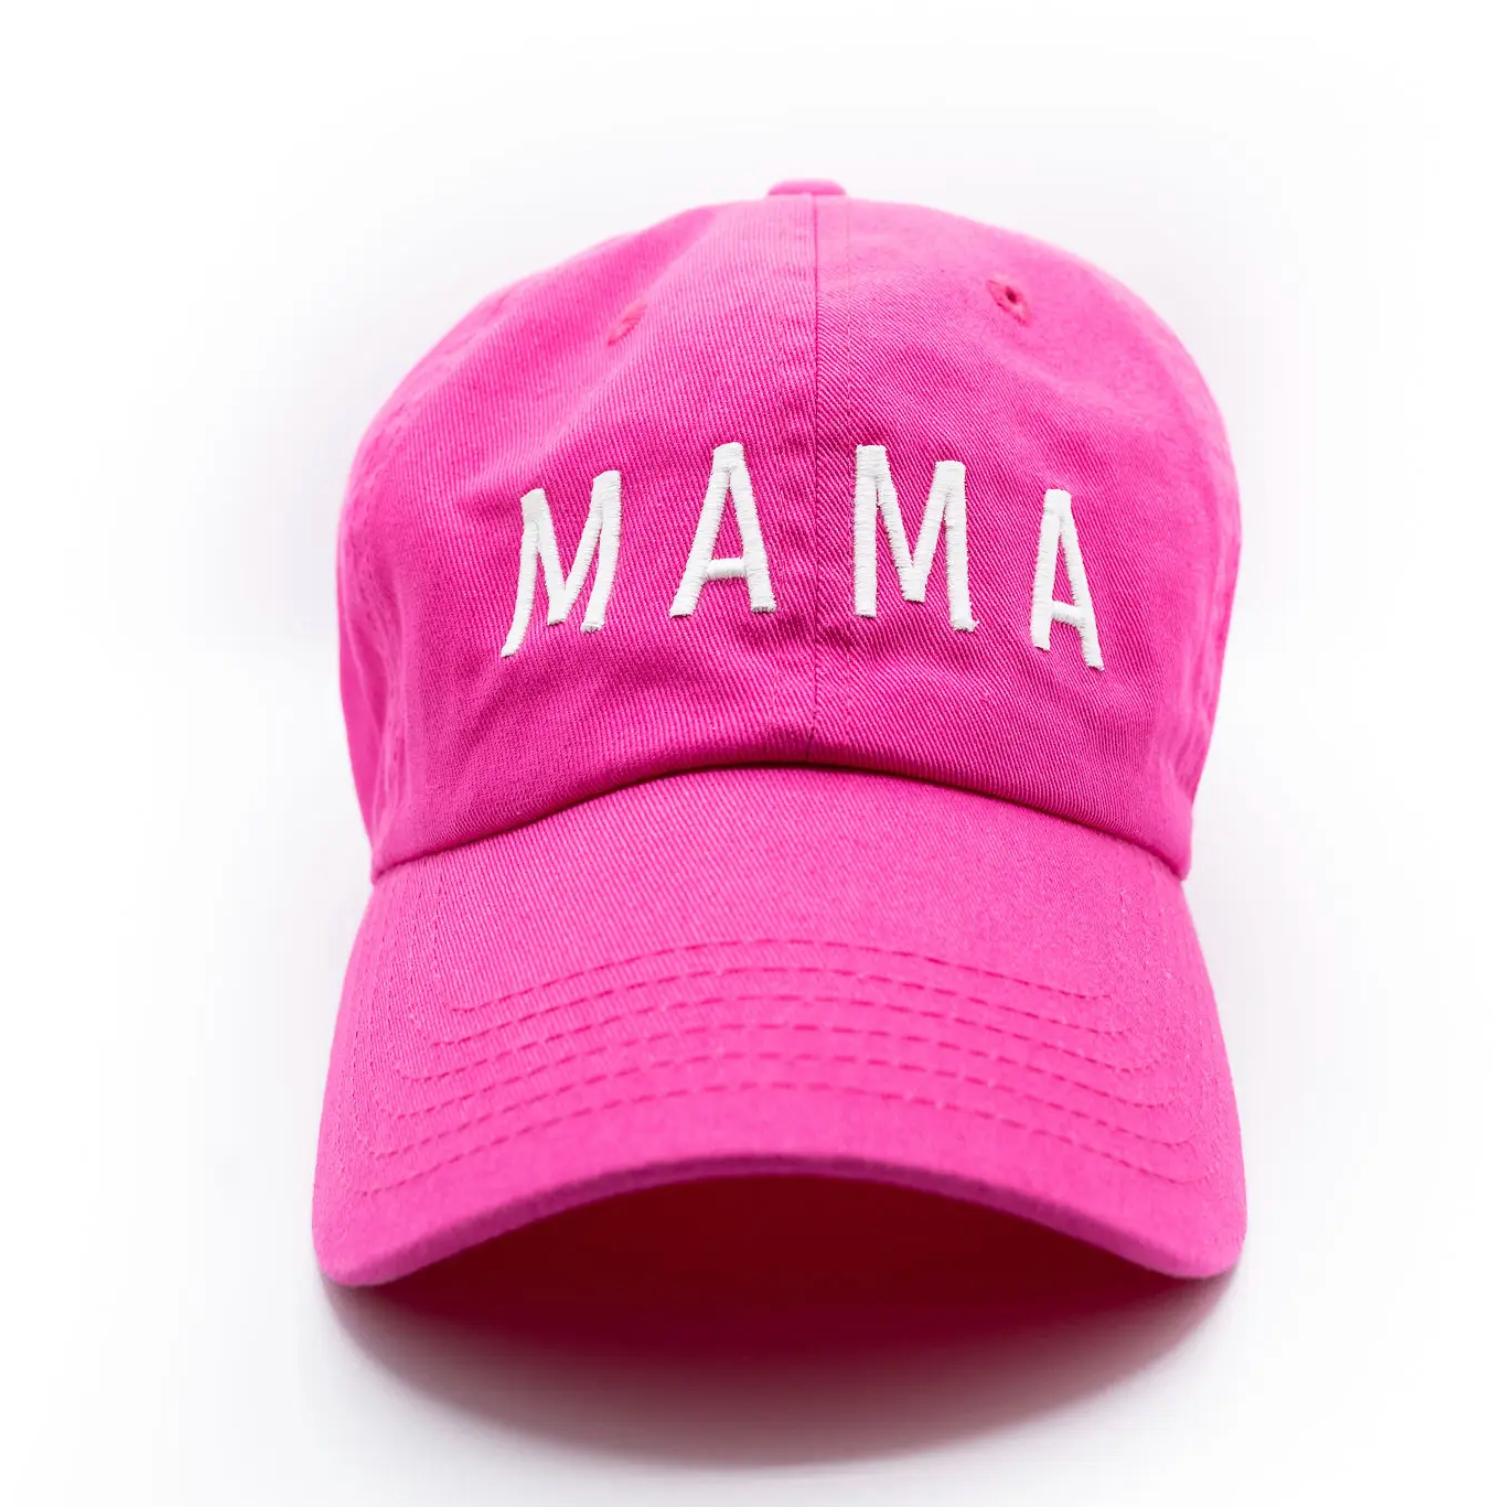 mama hat in hot pink